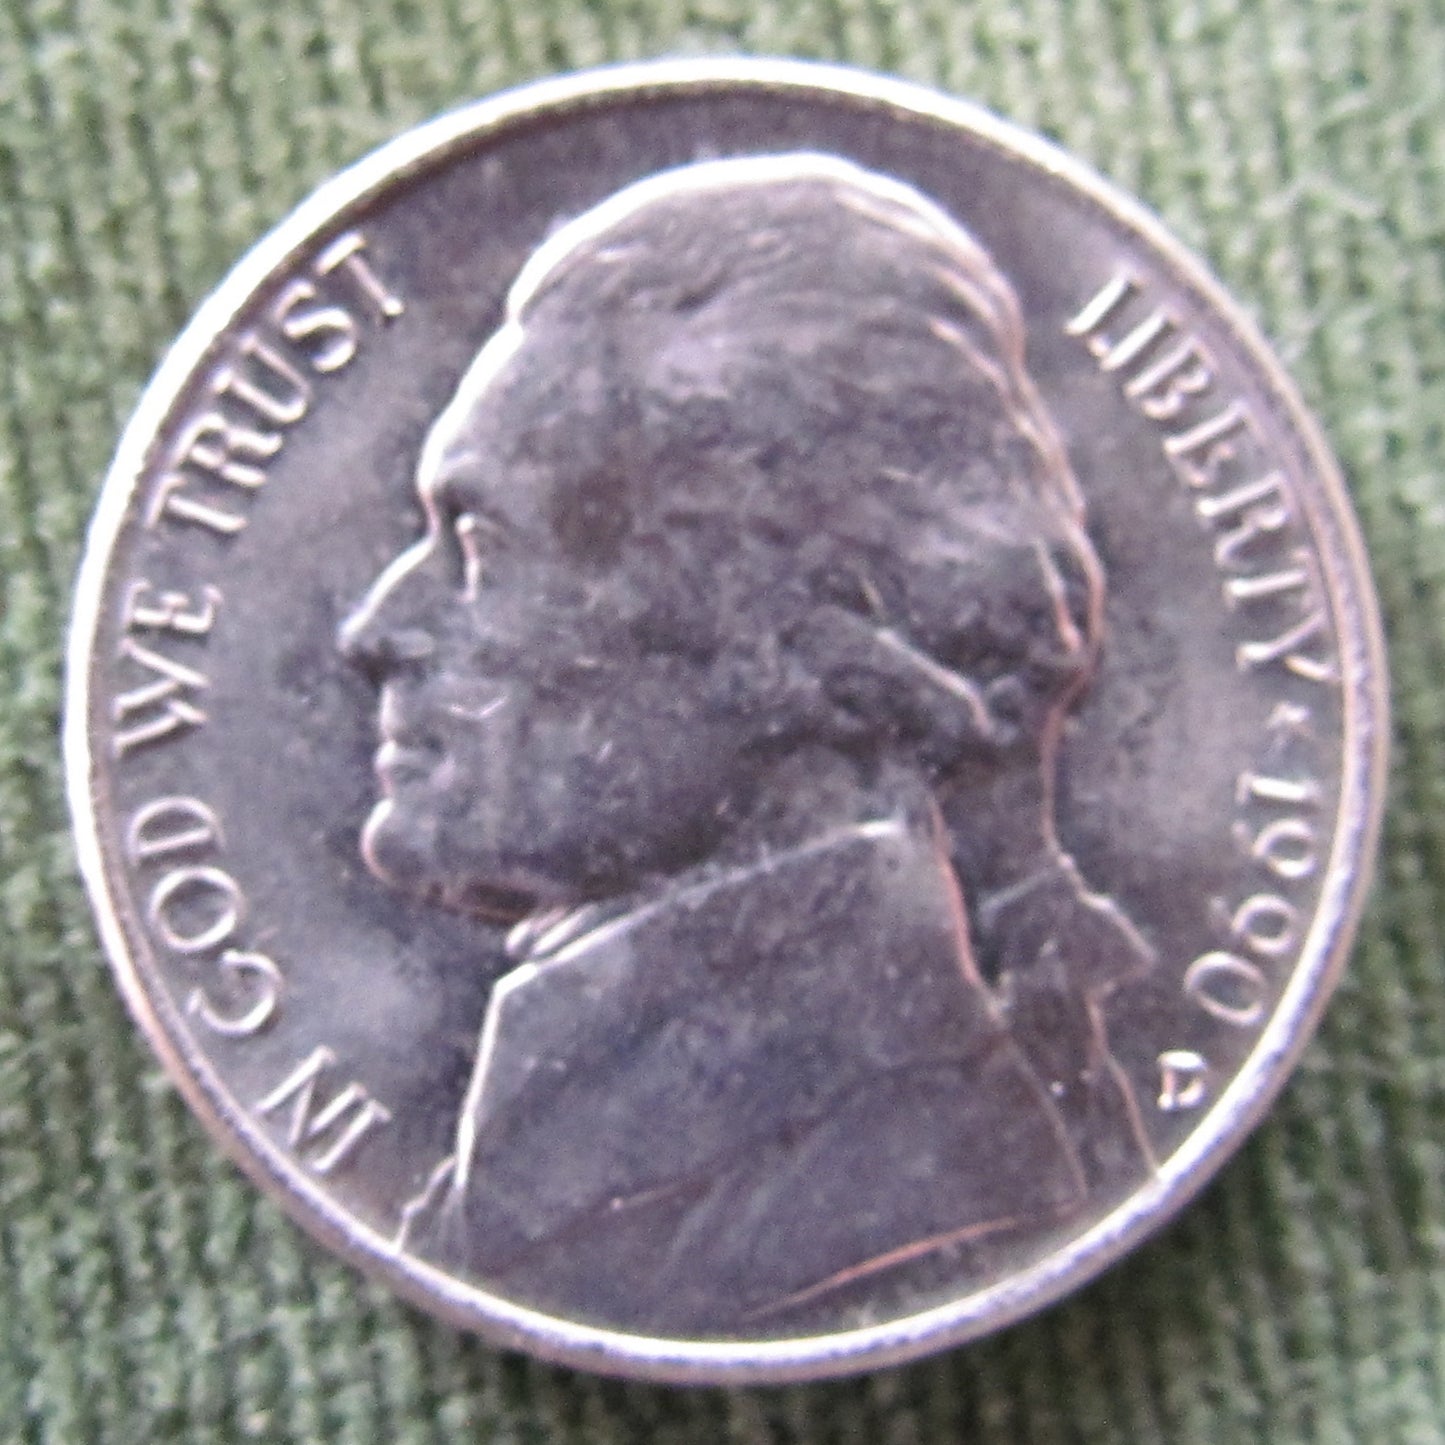 USA American 1990 D Nickel Jefferson Coin - Circulated